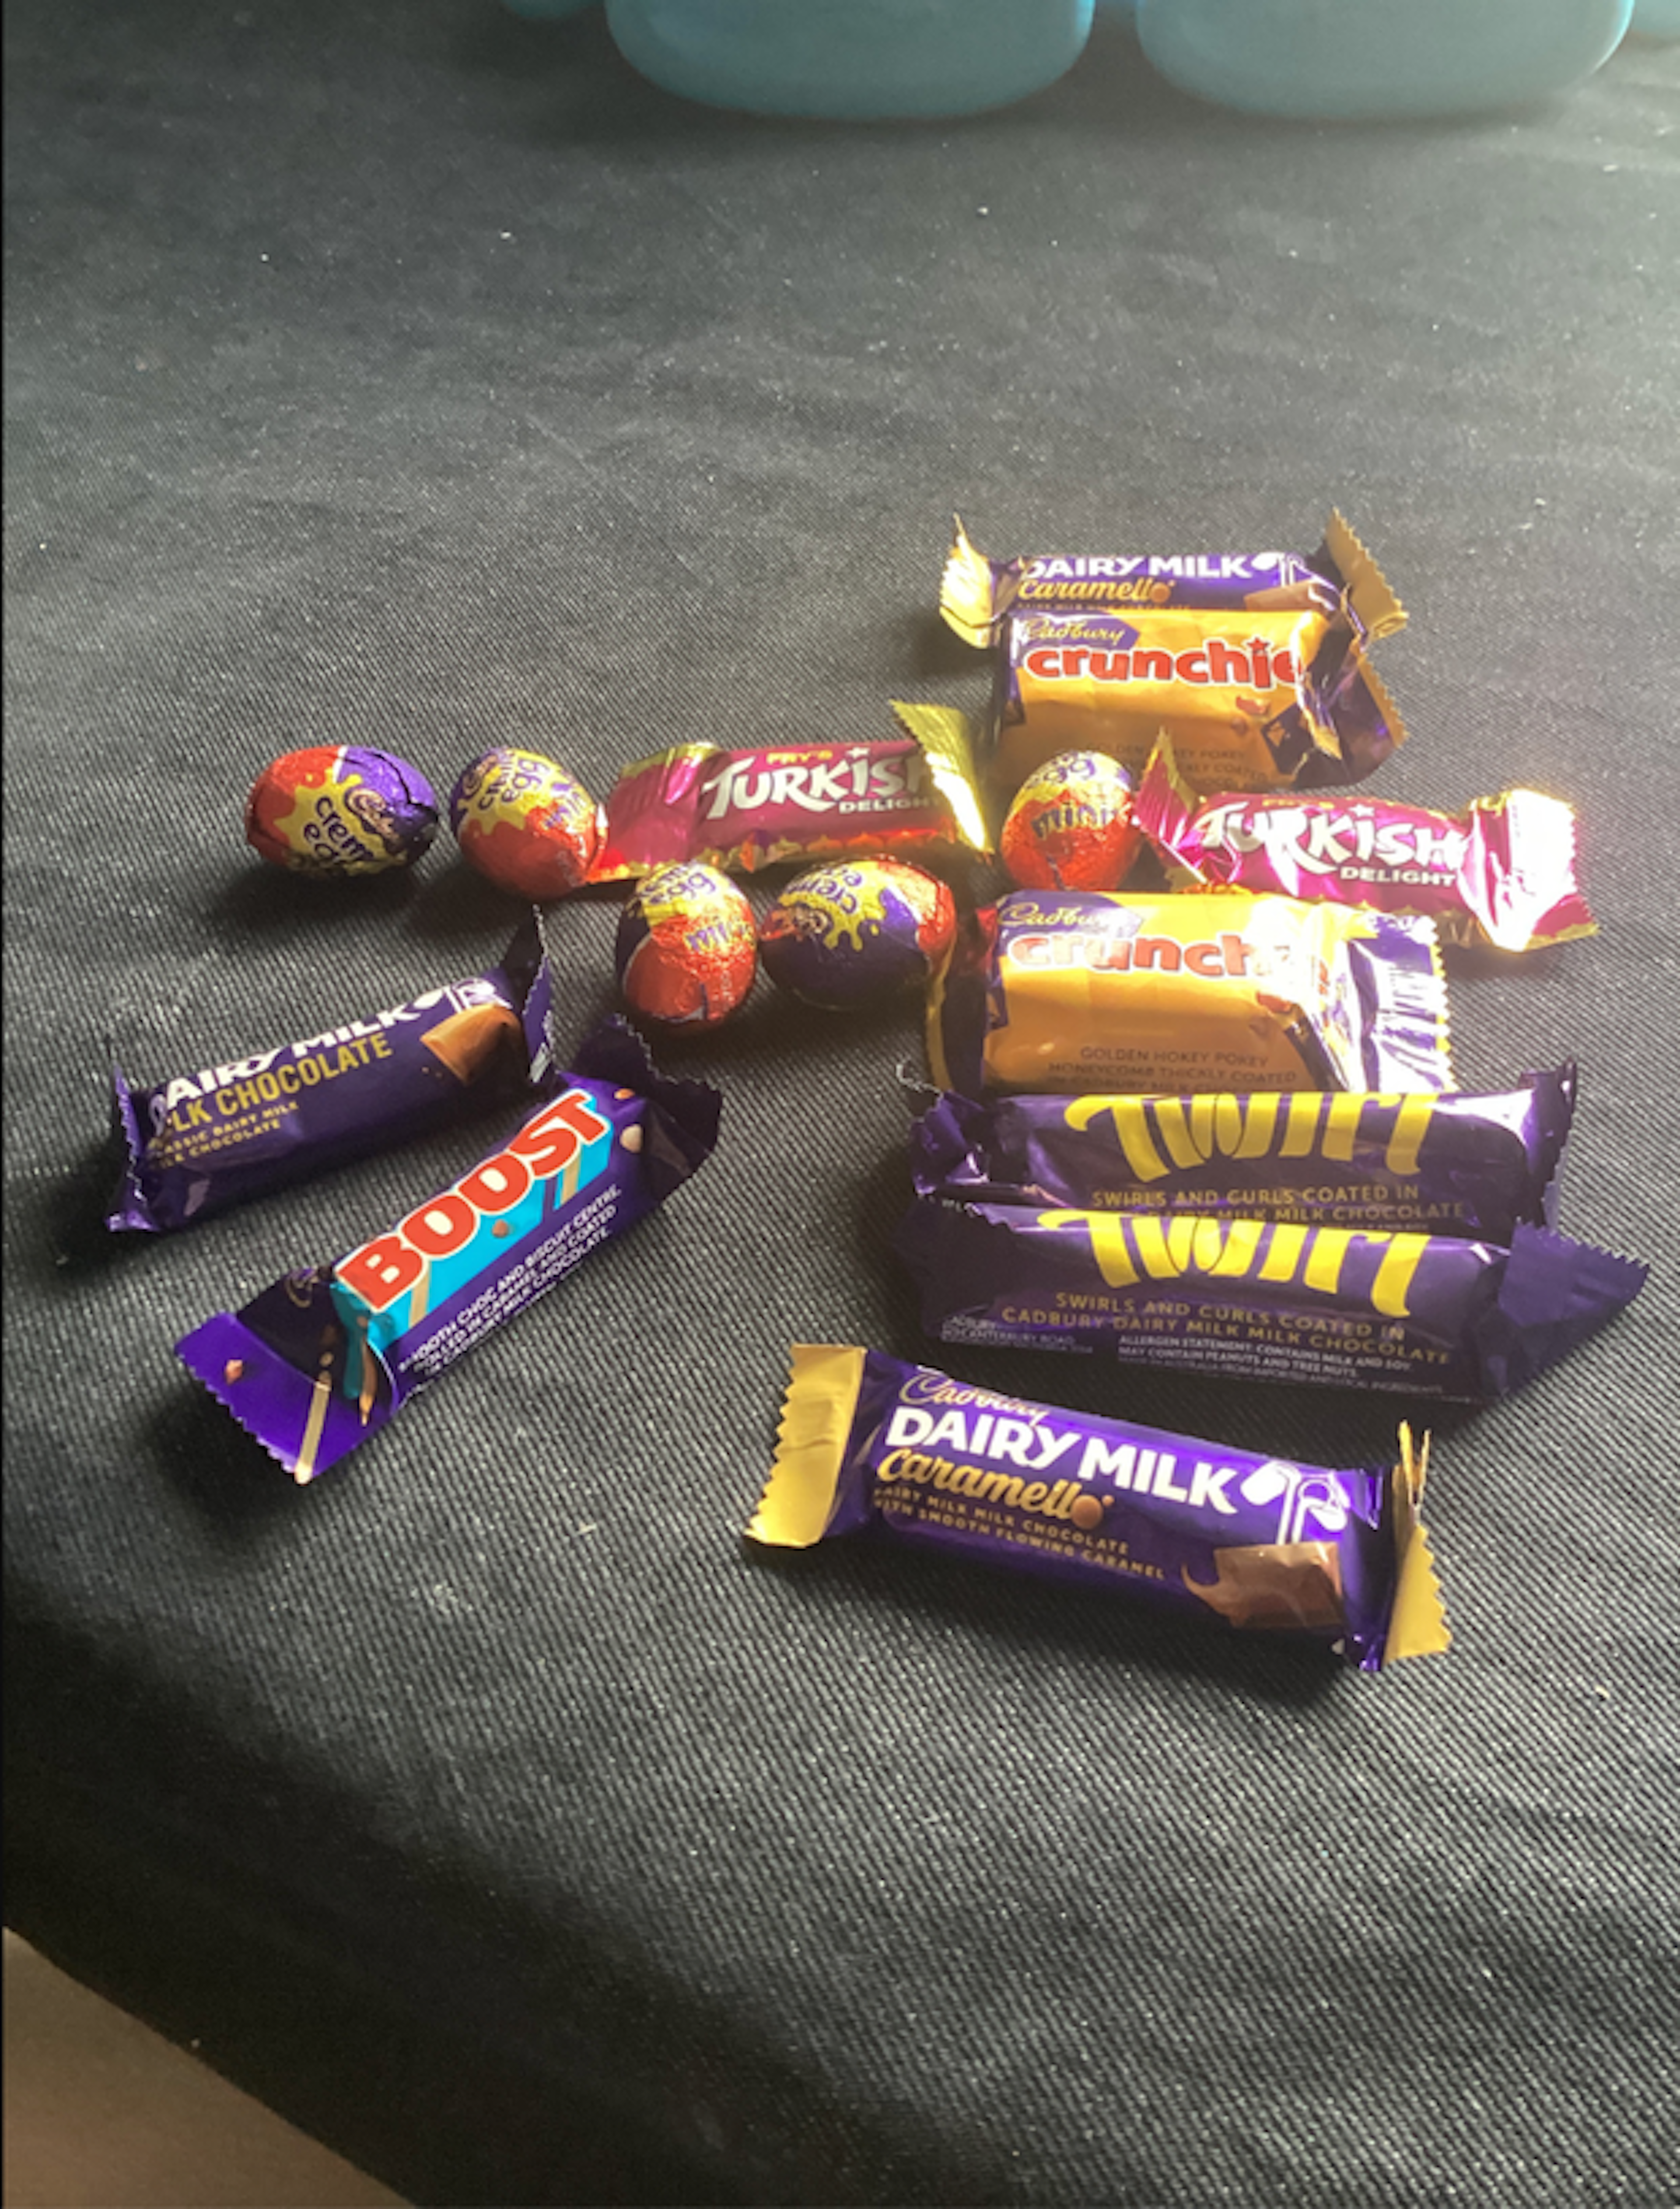 I’m going to eat all these chocolate and less than five minutes